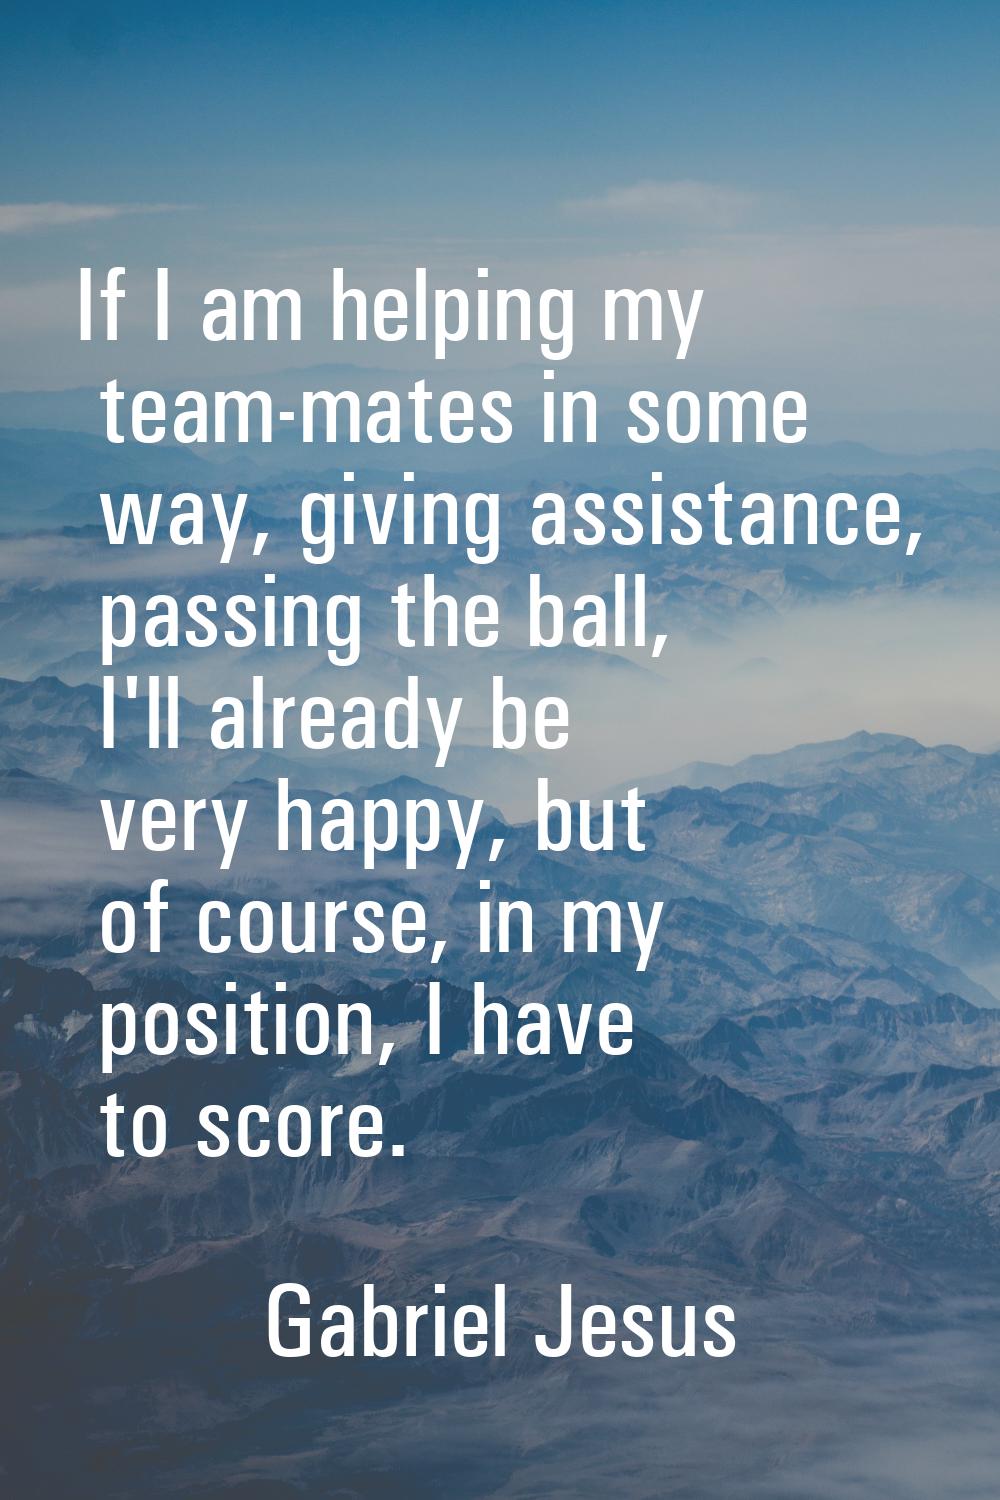 If I am helping my team-mates in some way, giving assistance, passing the ball, I'll already be ver